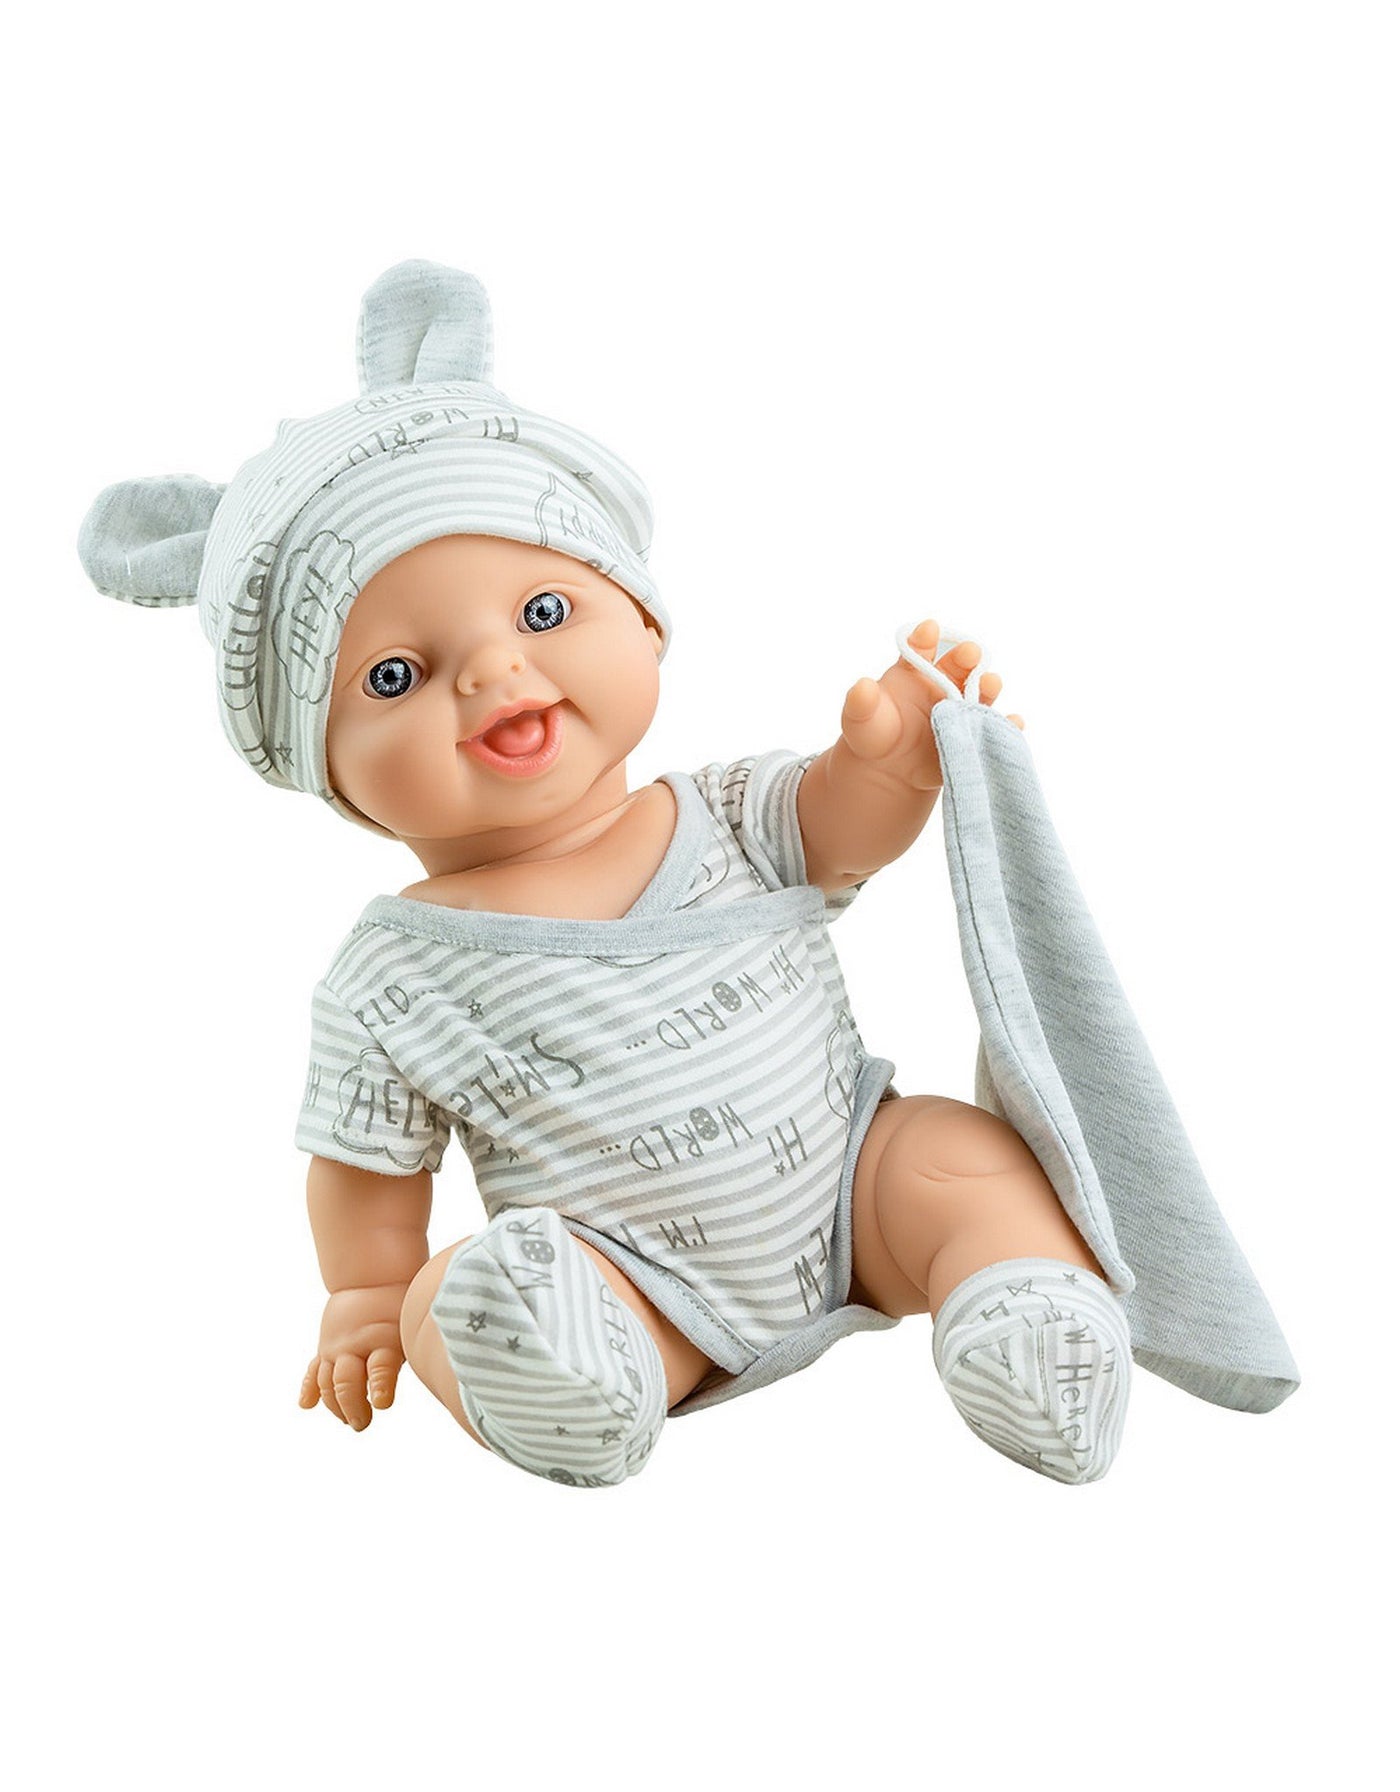 Gordis Doll Clothing - Gray lined onesie and hat - Paola Reina